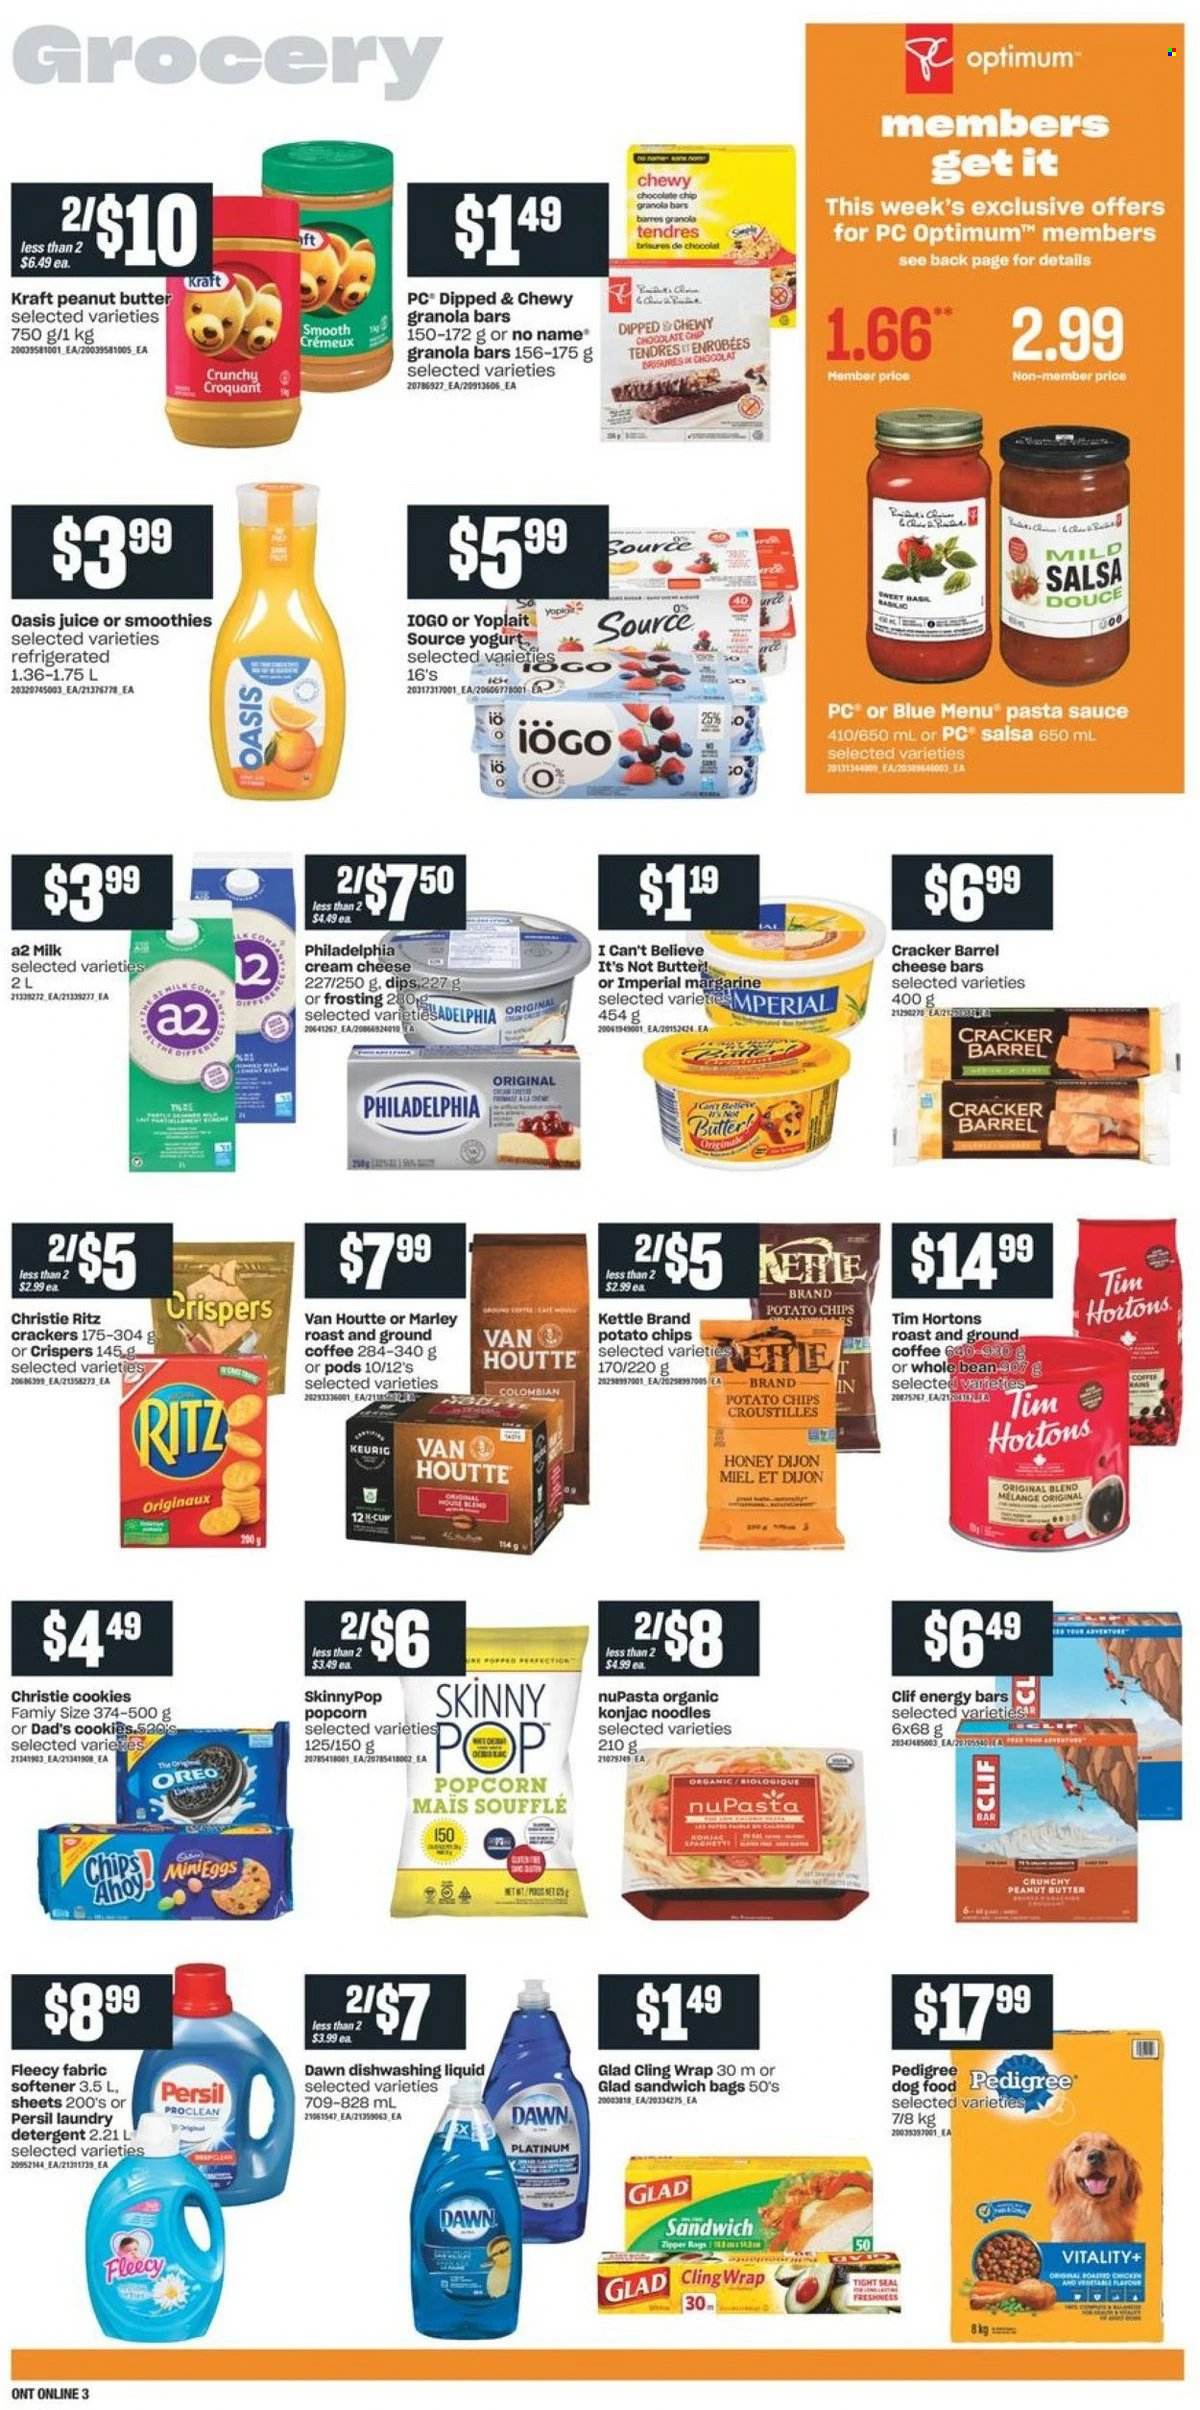 thumbnail - Independent Flyer - September 09, 2021 - September 15, 2021 - Sales products - No Name, pasta sauce, sauce, noodles, Kraft®, cream cheese, cheese, yoghurt, Yoplait, milk, margarine, I Can't Believe It's Not Butter, cookies, crackers, RITZ, potato chips, popcorn, frosting, granola bar, energy bar, salsa, honey, peanut butter, juice, coffee, ground coffee, Keurig, Persil, fabric softener, laundry detergent, dishwashing liquid, bag, rags, clingwrap, animal food, dog food, Optimum, Pedigree, Oreo, detergent, Philadelphia, chips. Page 7.